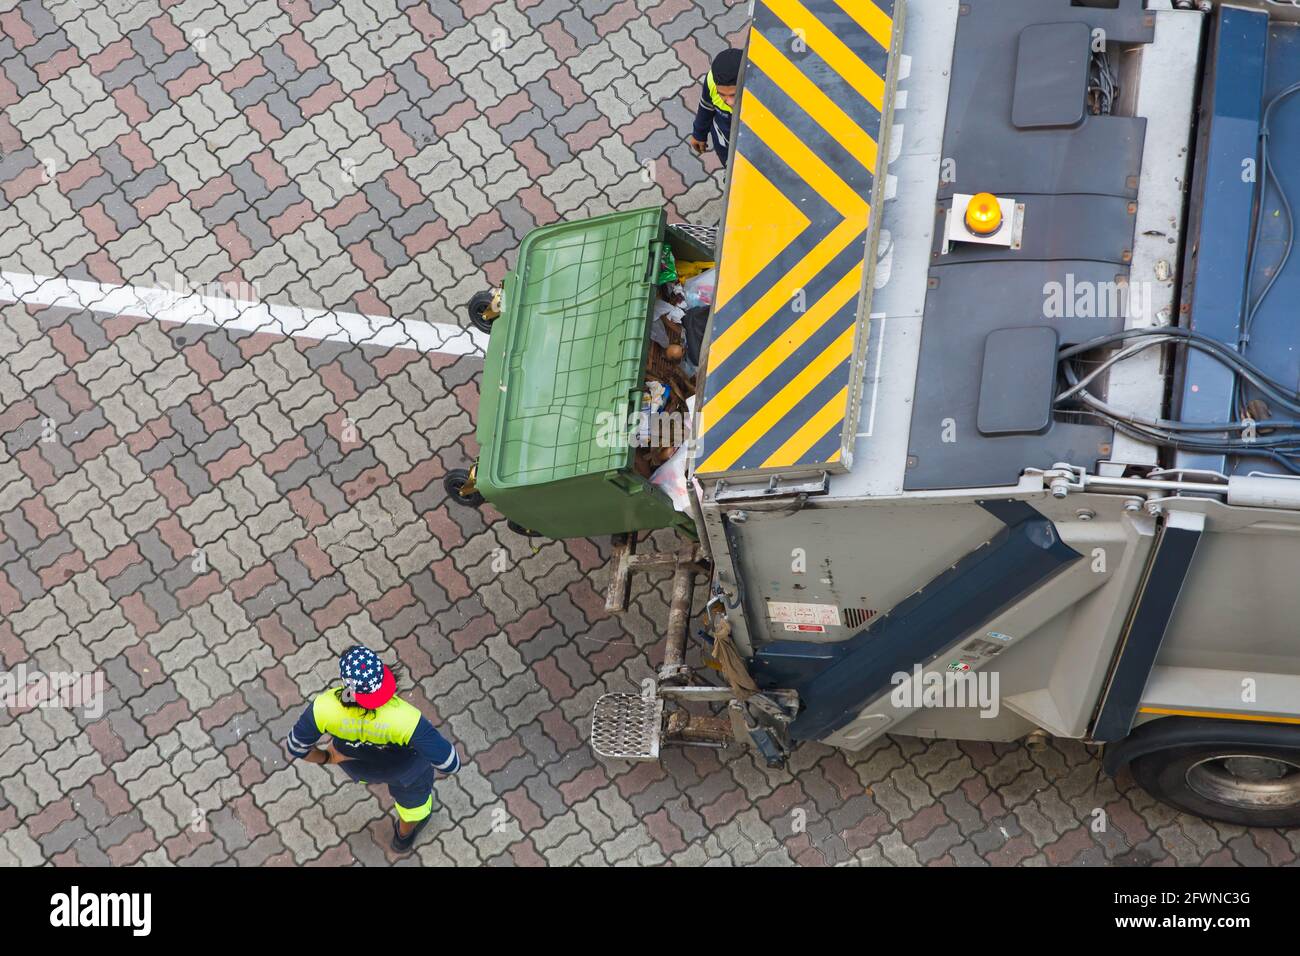 Aerial view of refuse collection, fees for households to $9.63 per month (incl. GST) for HDB/private apartments and $32.07 per month. Singapore. Stock Photo